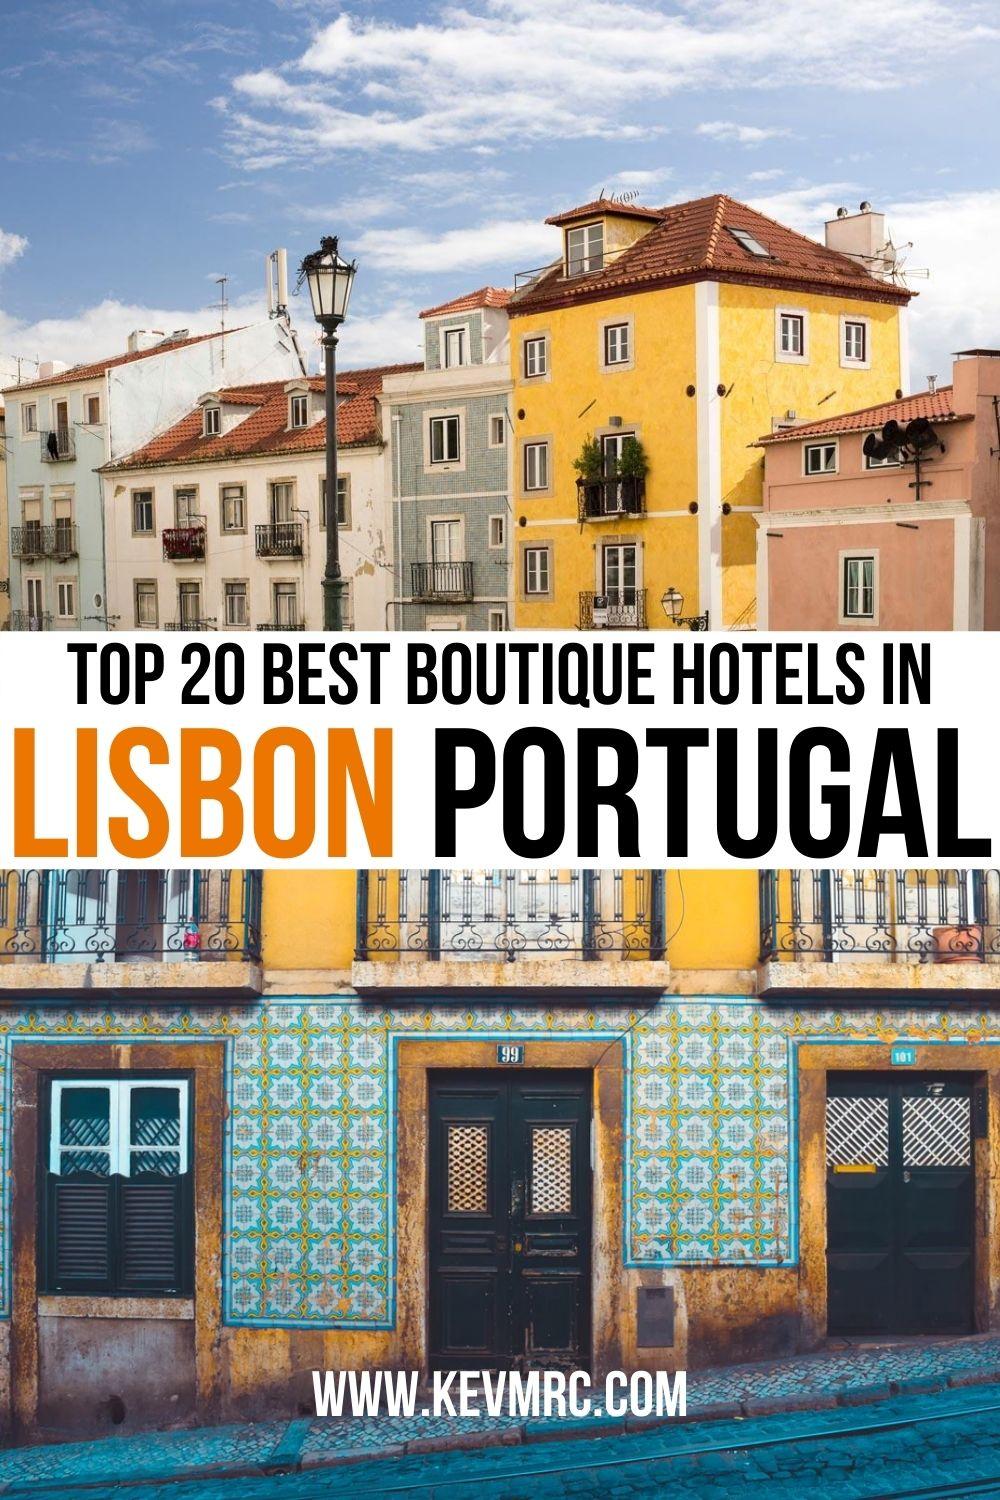 20 Best Boutique Hotels in Lisbon Portugal. I've selected the 20 best boutique hotels in Lisbon Portugal, where you'll have an incredible experience. lisbon hotels portugal | best lisbon hotels | portugal travel lisbon | lisbon hotel boutique | lisbon hotel design | lwhere to stay in lisbon portugal | lisbon portugal hotel